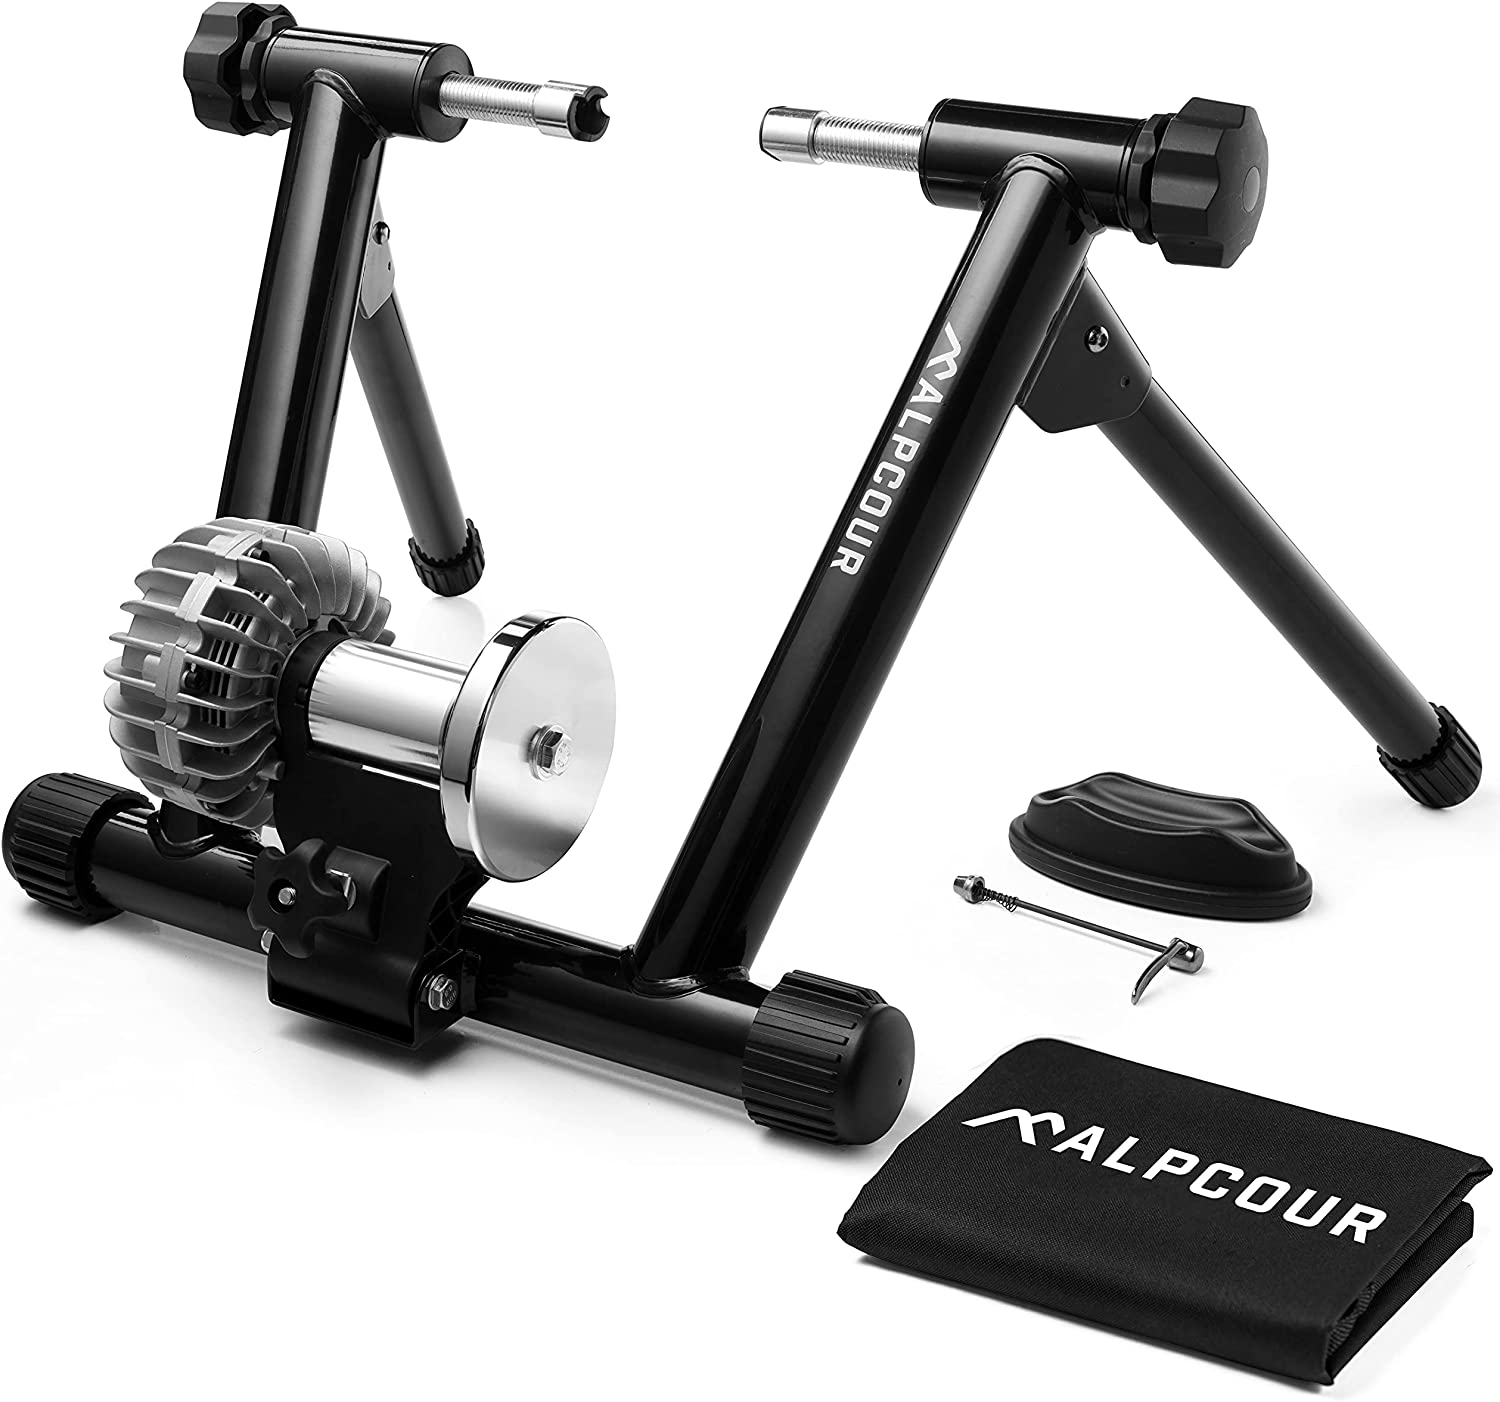 Alpcour Fluid Bike Trainer Stand - image 1 of 9